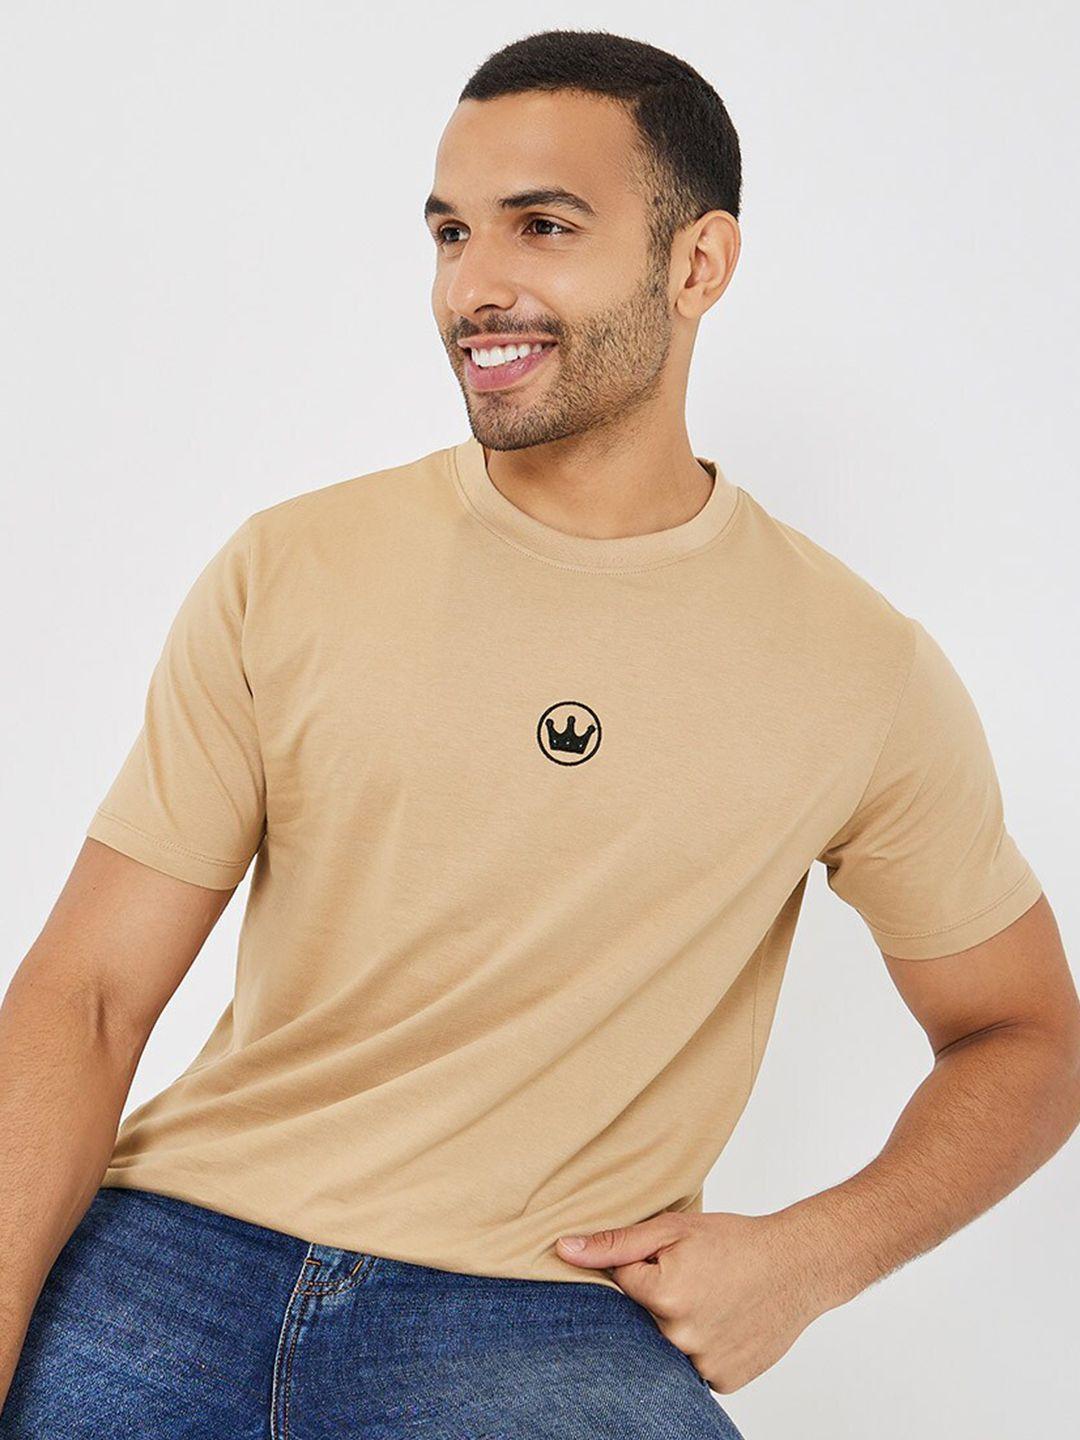 Styli Beige Short Sleeves Pure Cotton T-shirt